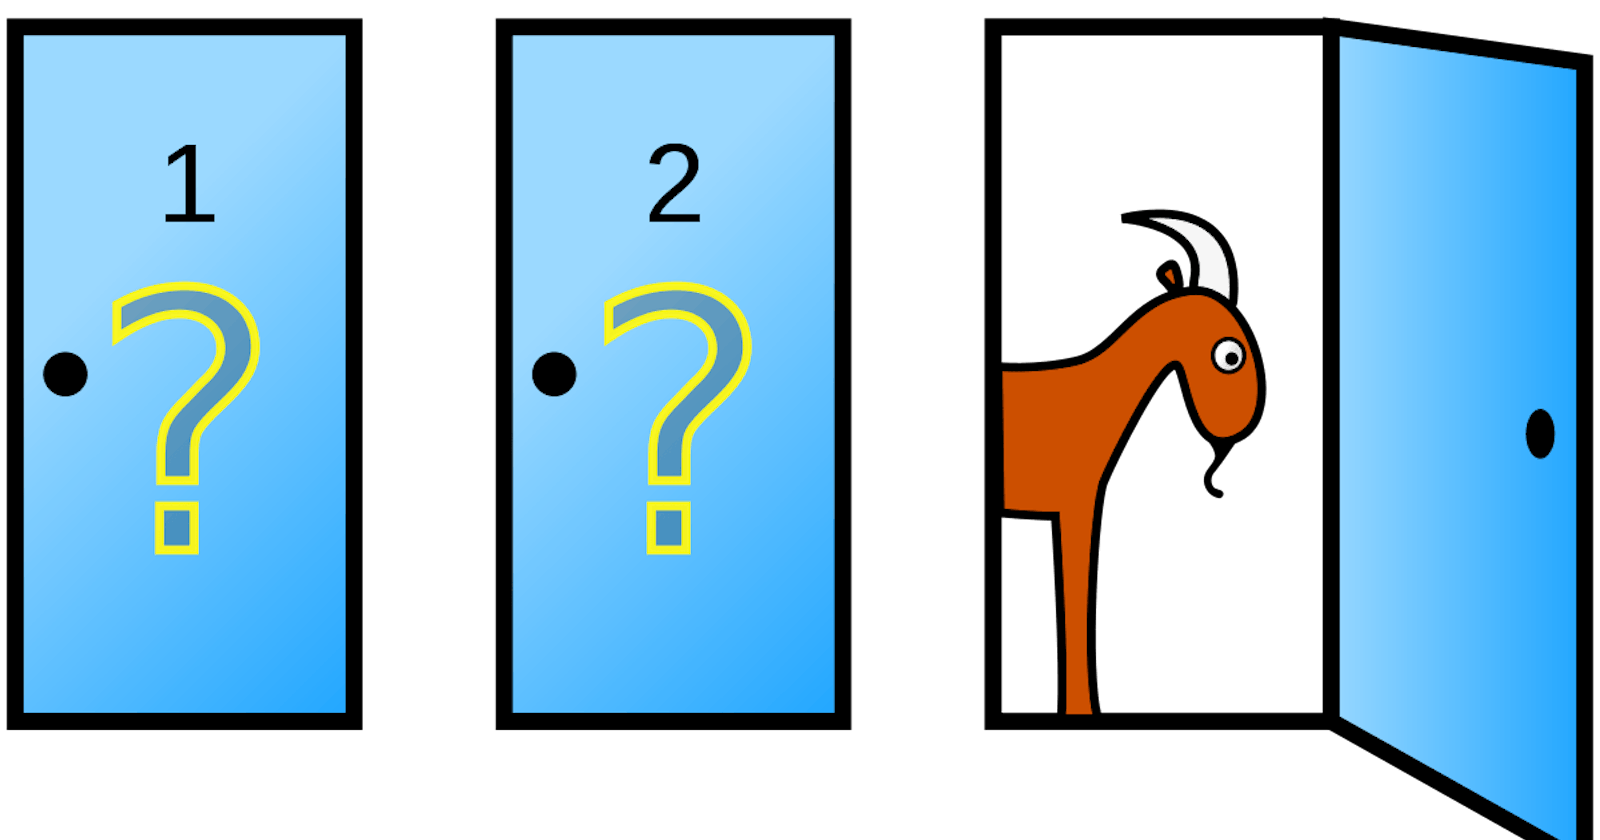 Learn how to simulate the Monty Hall problem in python